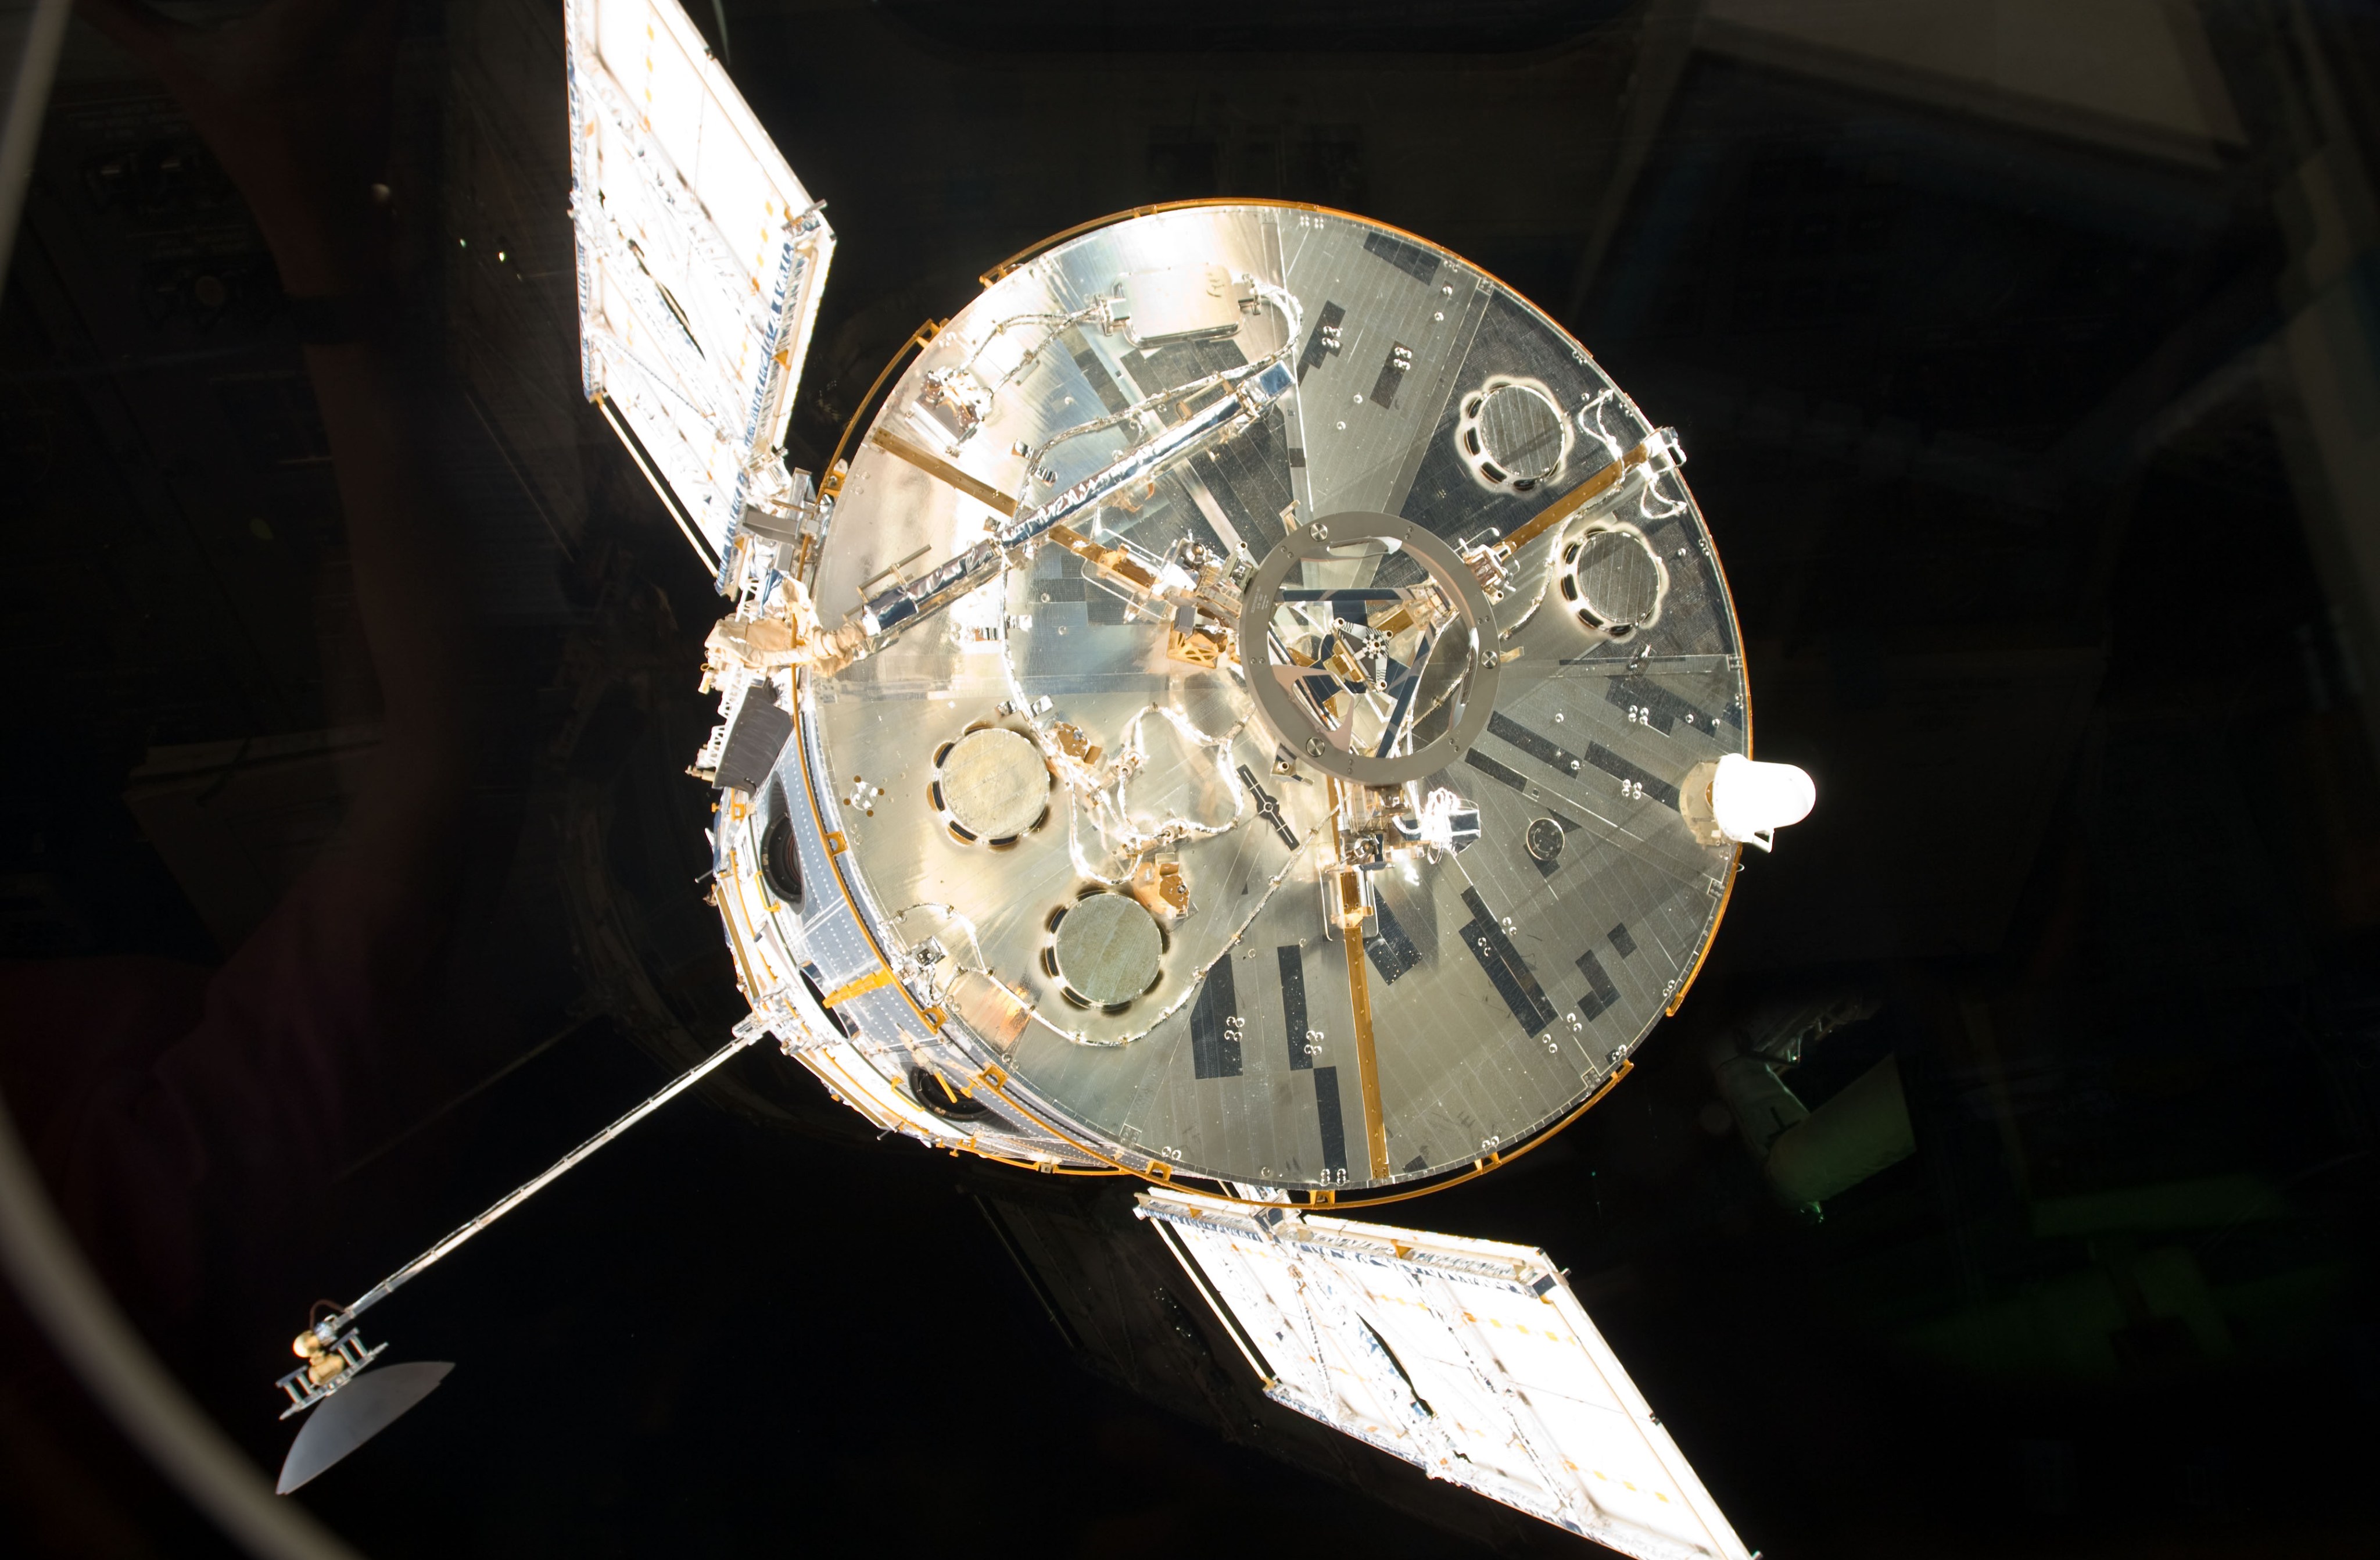 Hubble is seen through a window floating away into the darkness of space after being released by the space shuttle. Hubble's solar panels, antennae and underside are all visible.